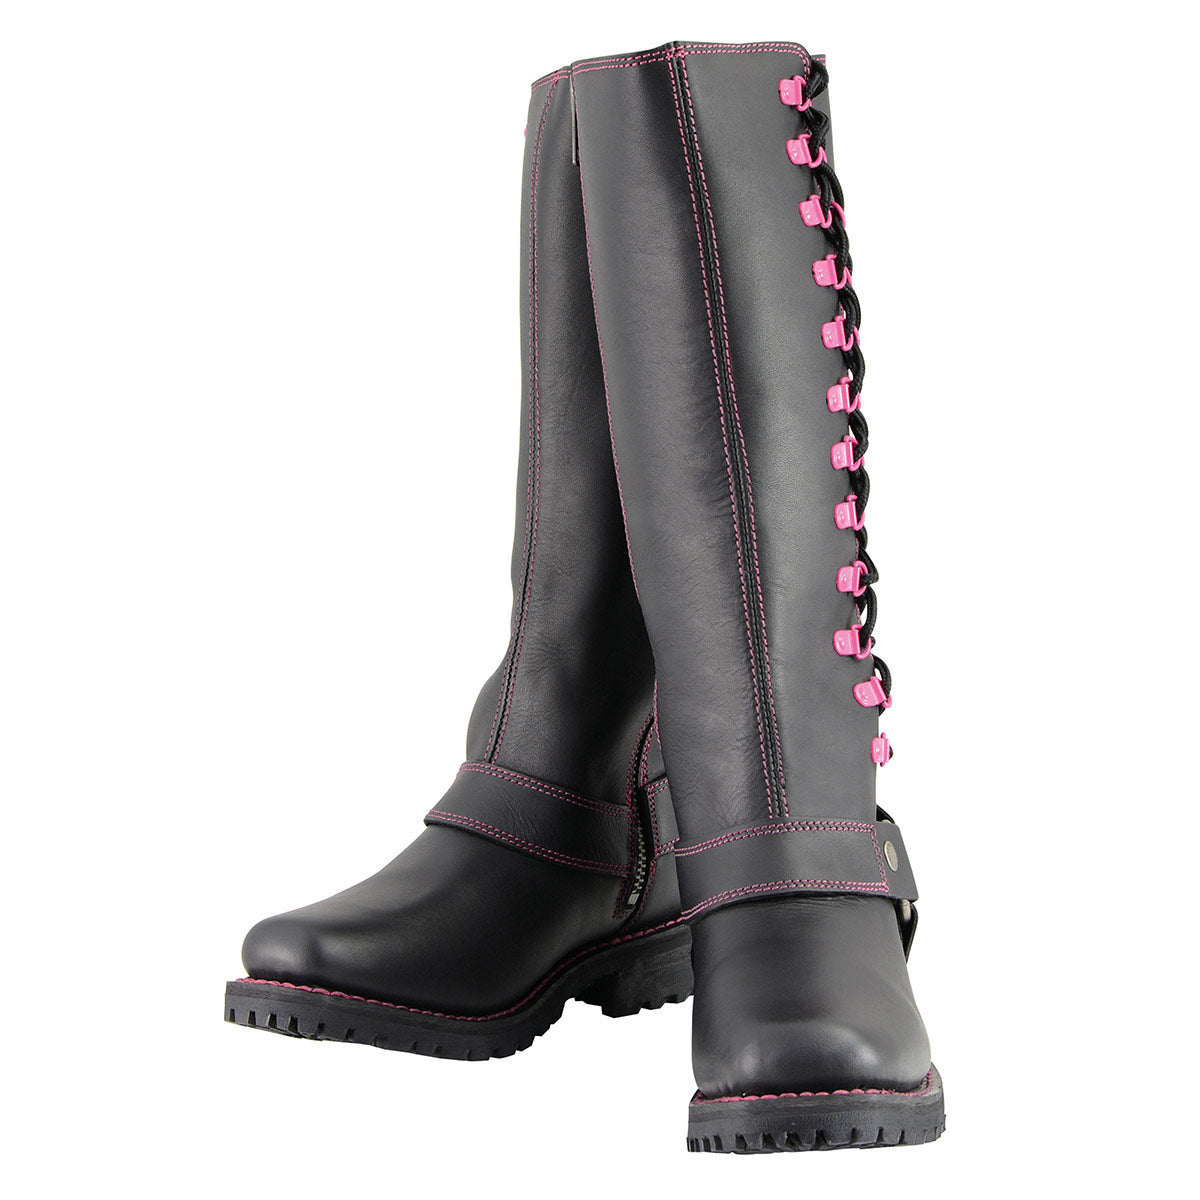 Milwaukee Leather MBL9367 Women's Black 14-inch Leather Harness Boots with Fuchsia Accent Lacing